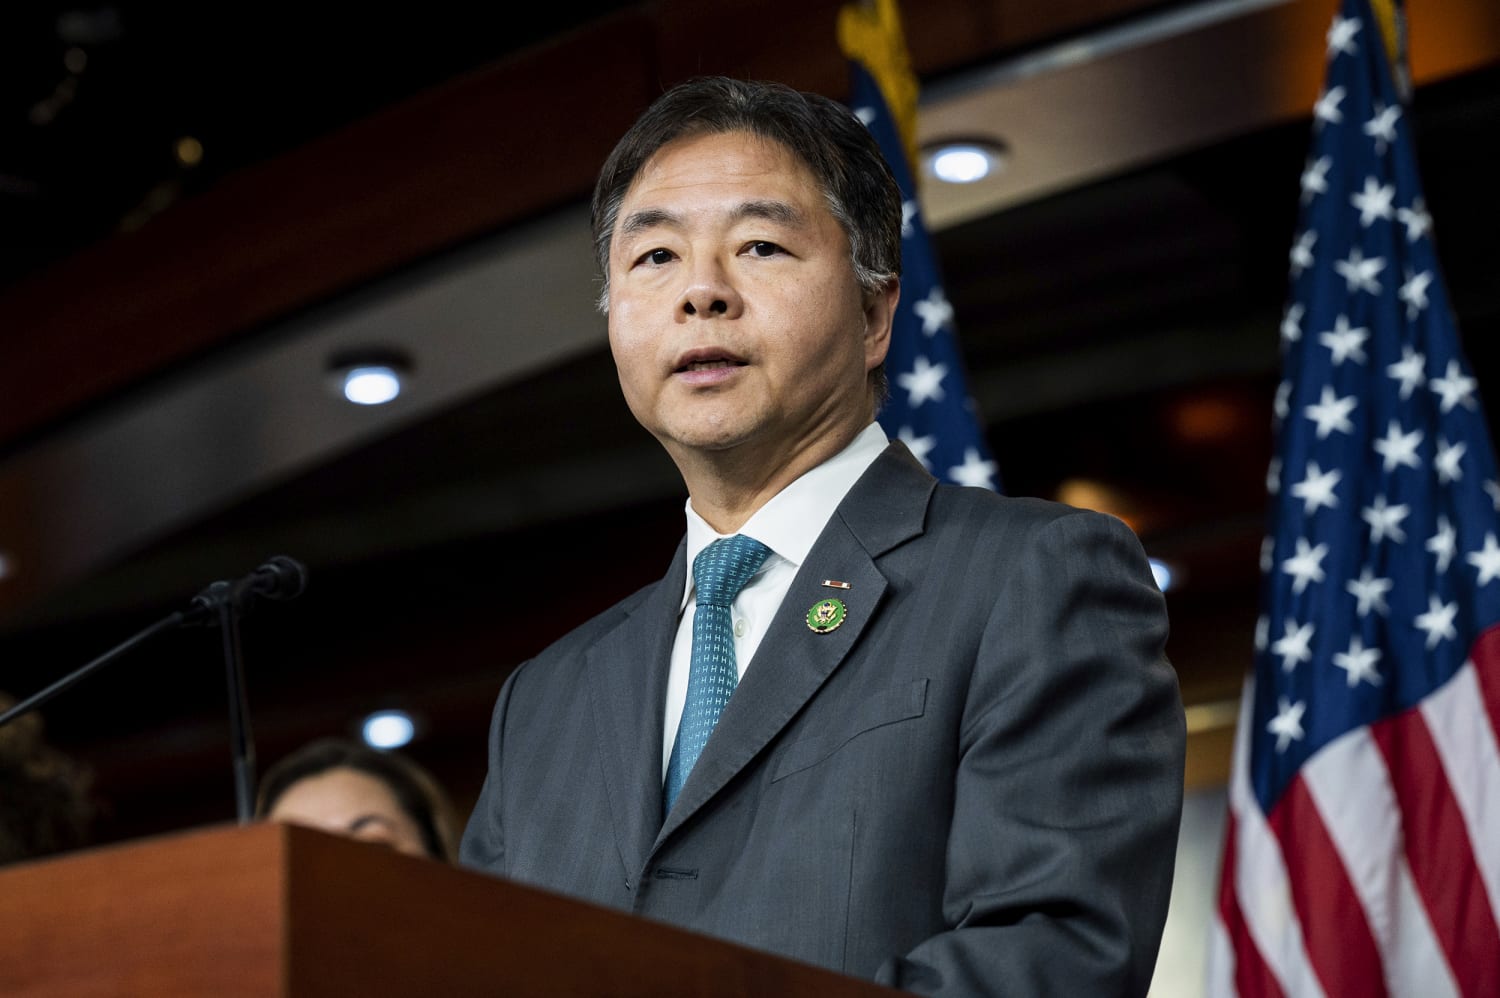 AI wrote a bill to regulate AI. Now Rep. Ted Lieu wants Congress to pass it.